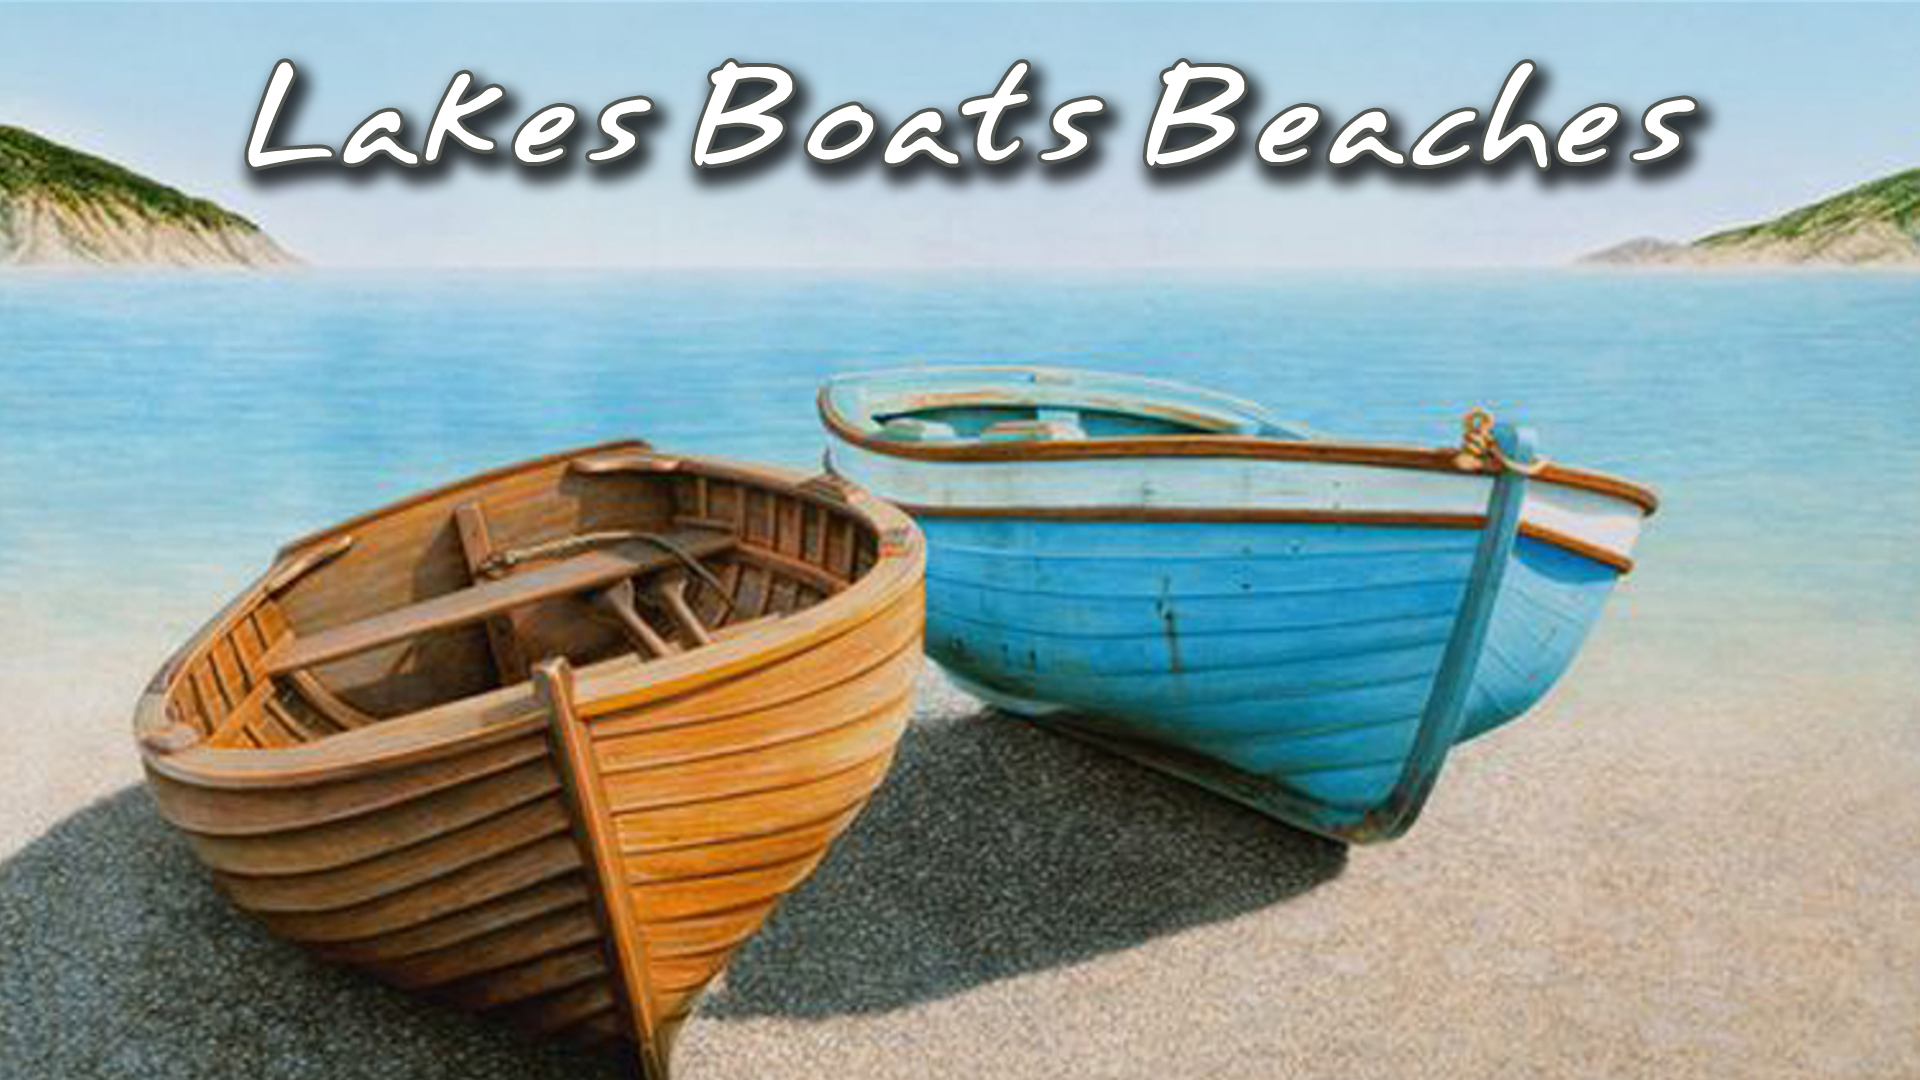 Lakes Boats Beaches  – What excuse would be good enough?